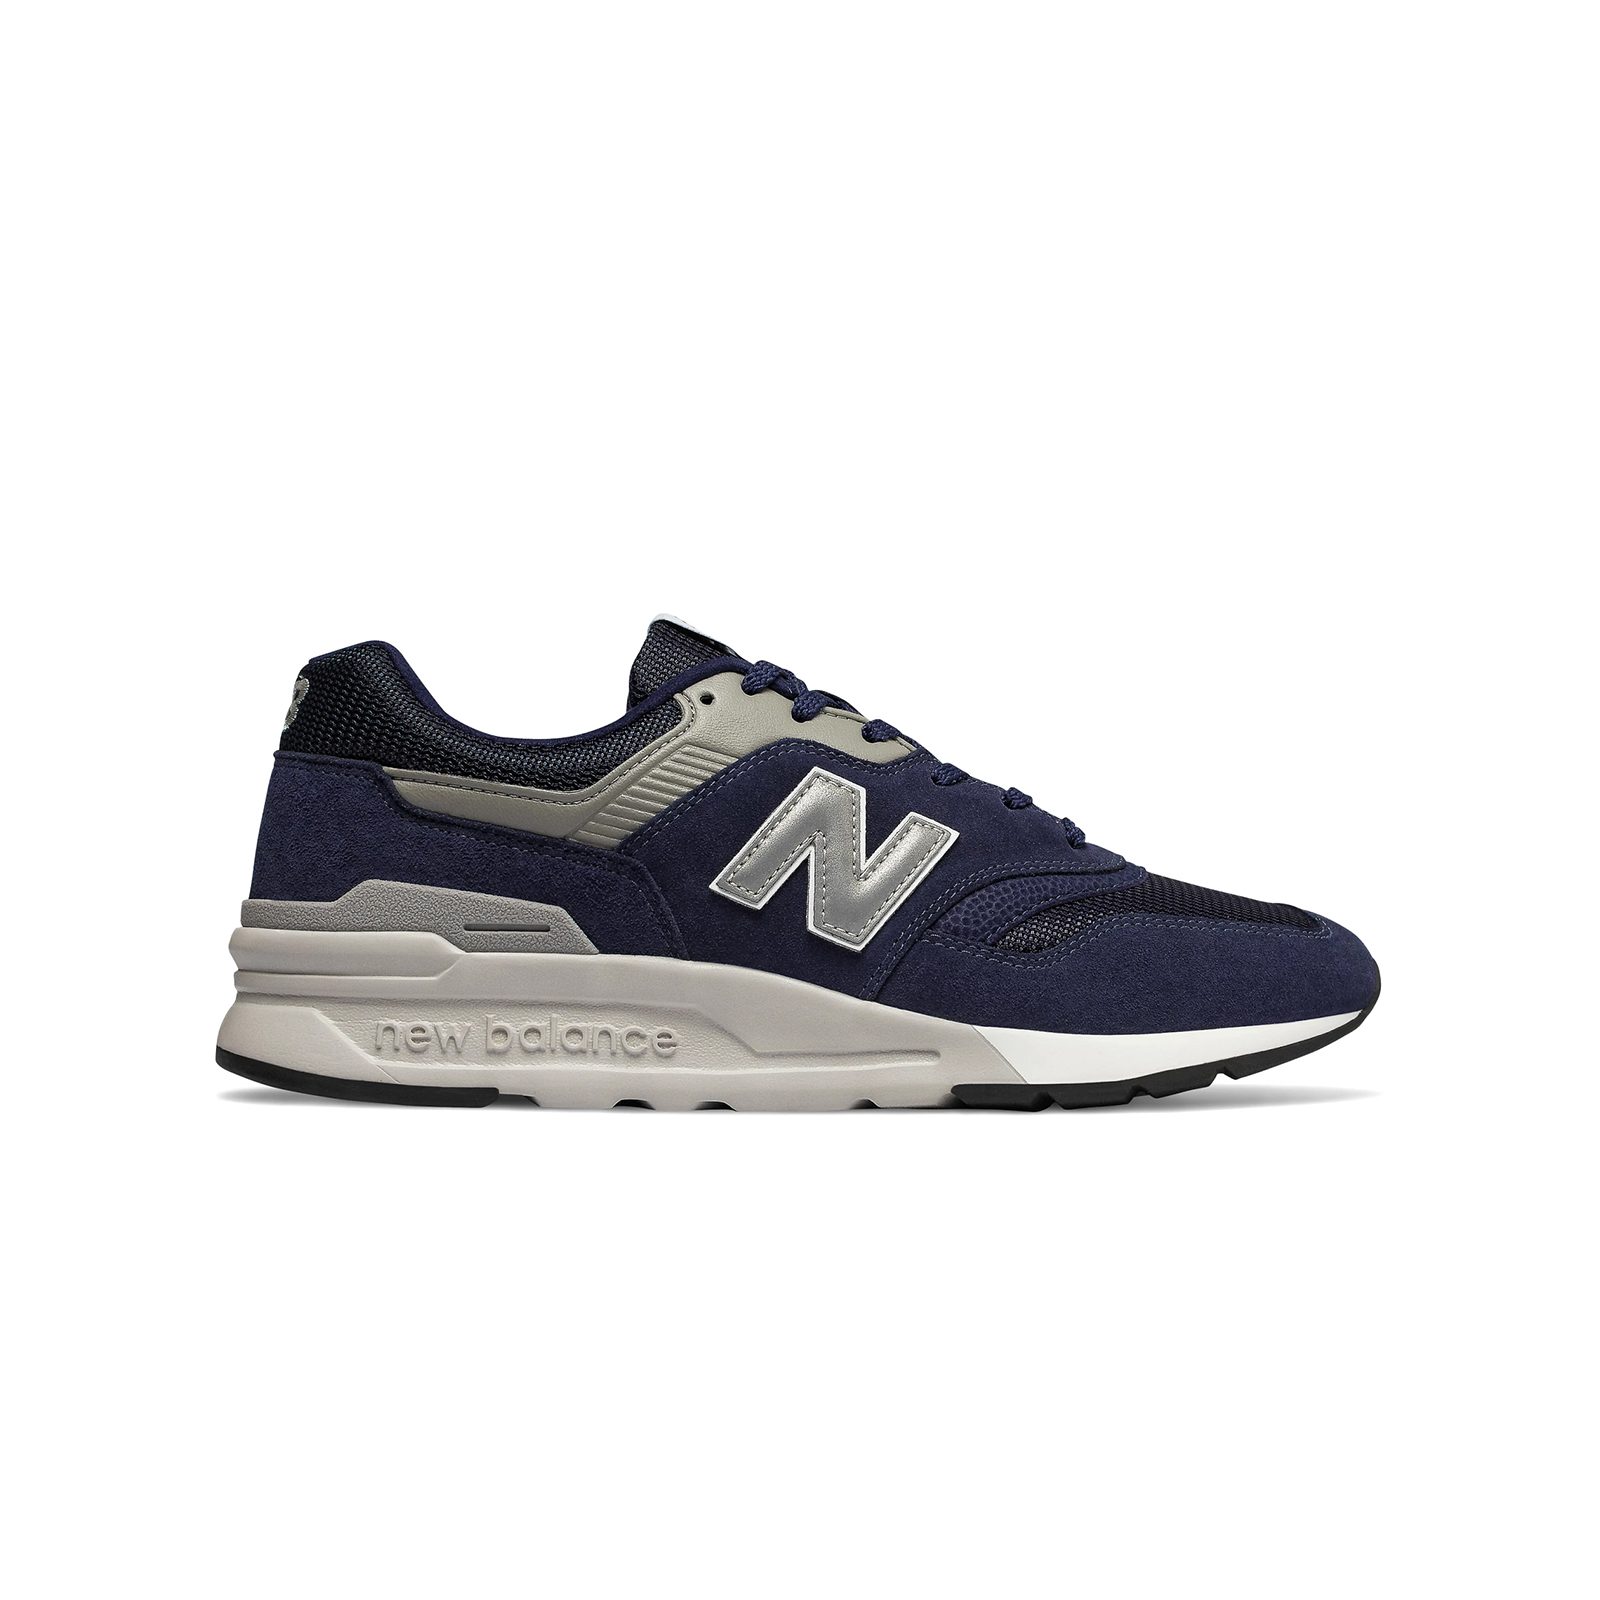 New balance ls - SHOES CLASSIC RUNNING - PIGMENT (481) Ανδρικά > Παπούτσια > Sneaker > Παπούτσι Low Cut